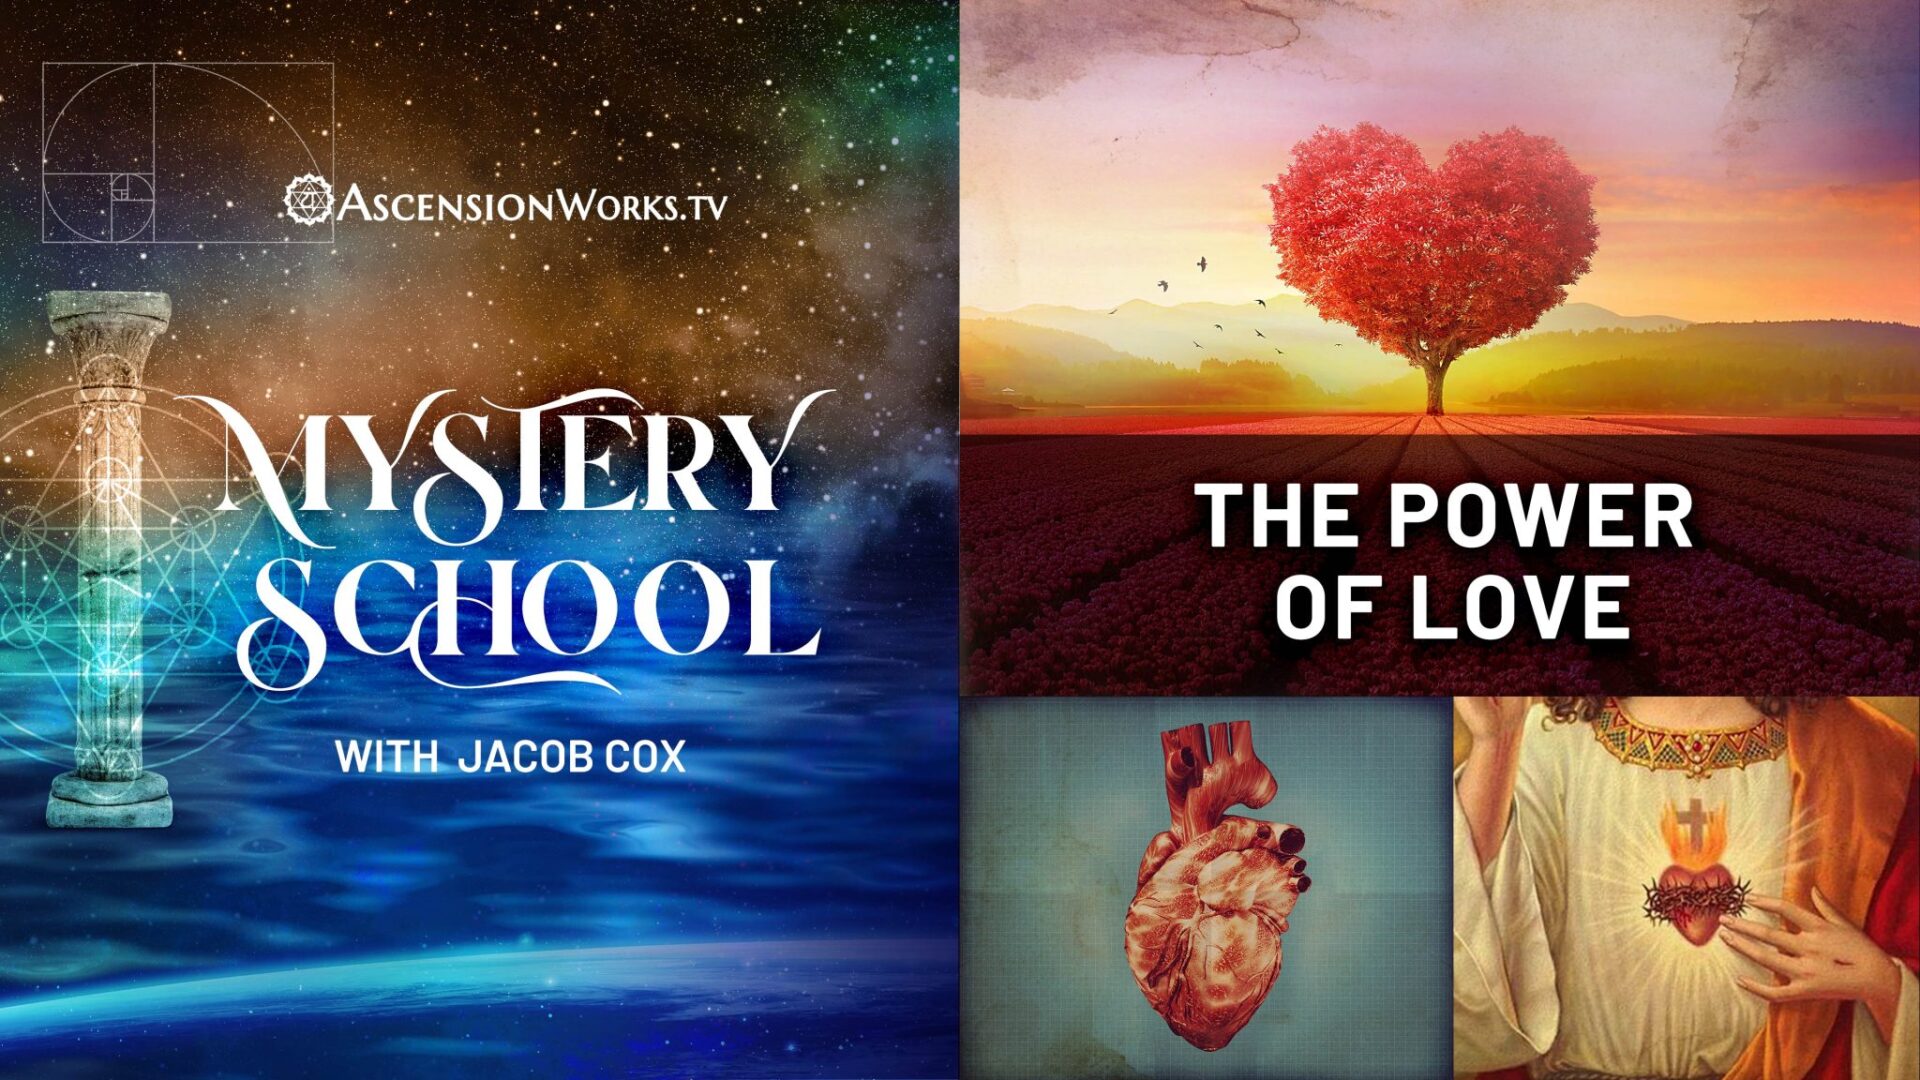 Mystery School teachings and discussions on The power of love